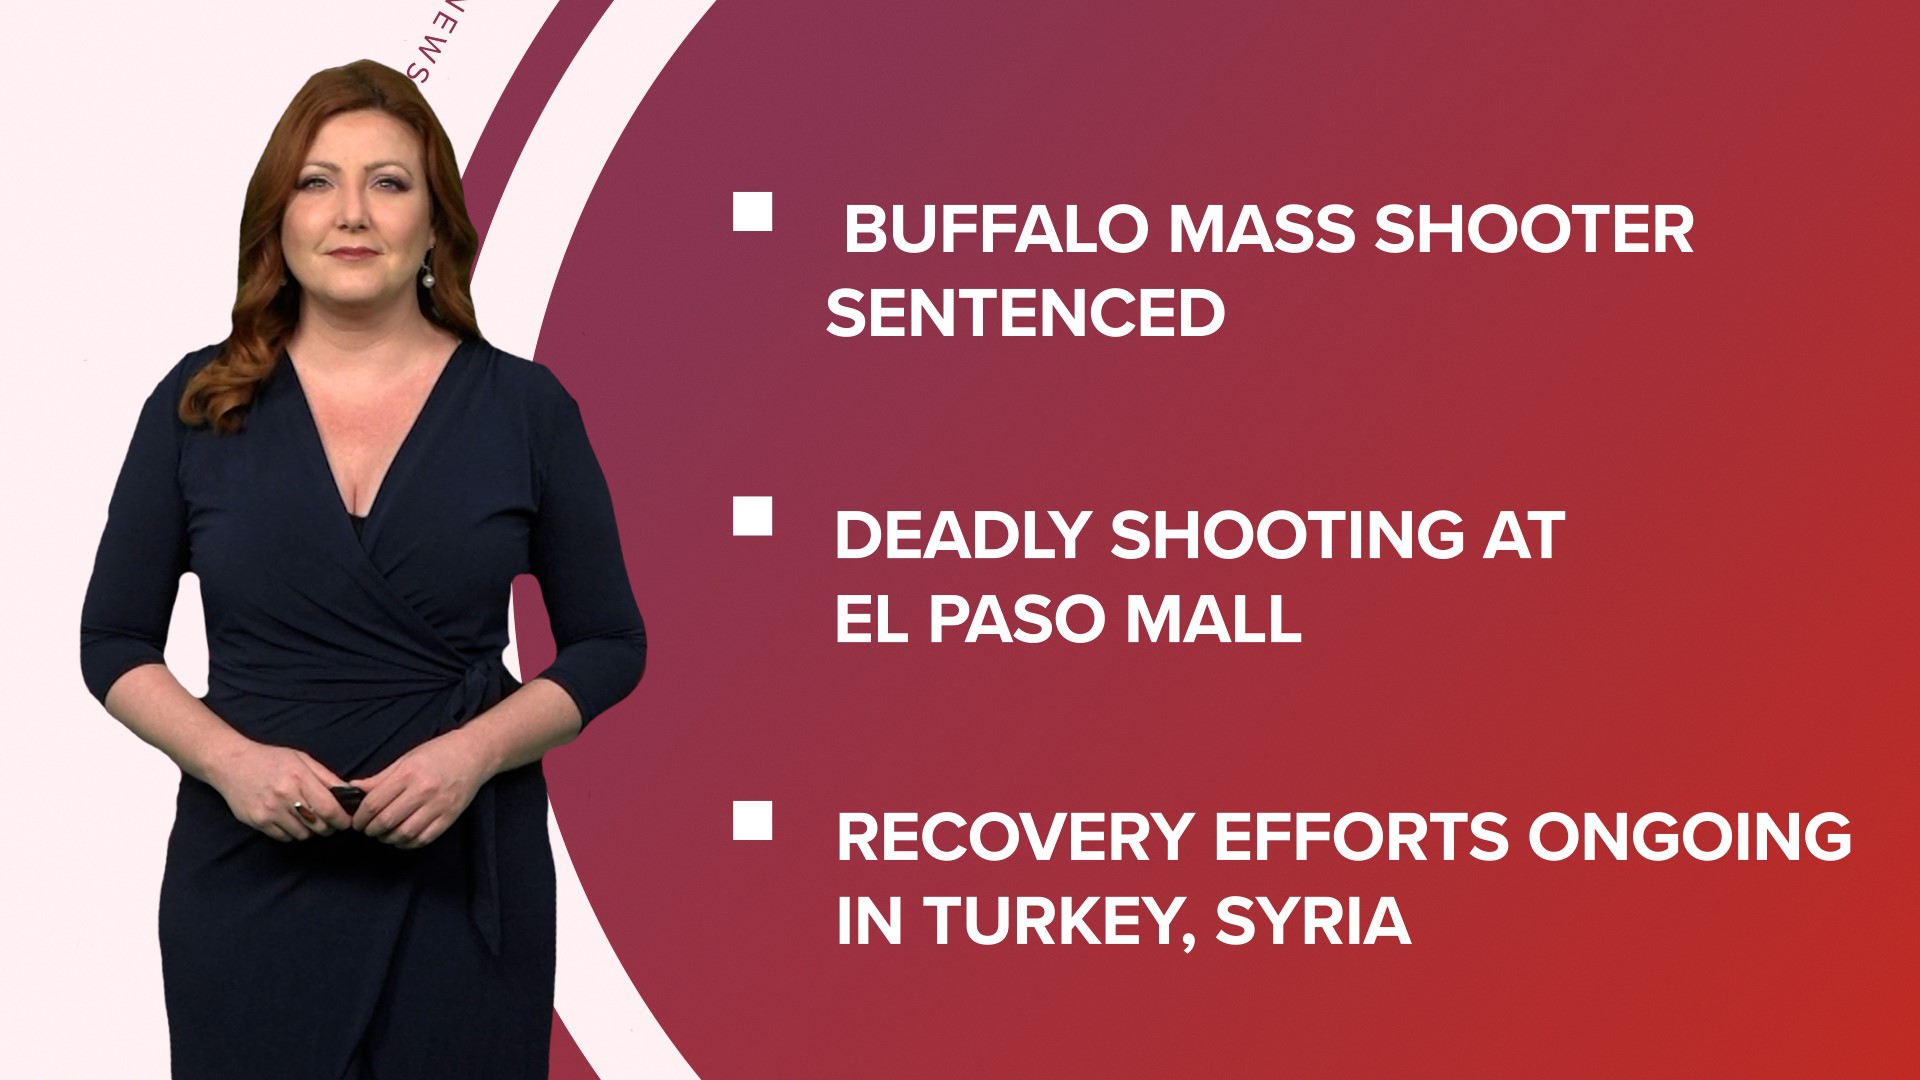 A look at what is happening in the news from the Buffalo mass shooter sentenced to life in prison to getting rid of biased rules for kidney transplants.